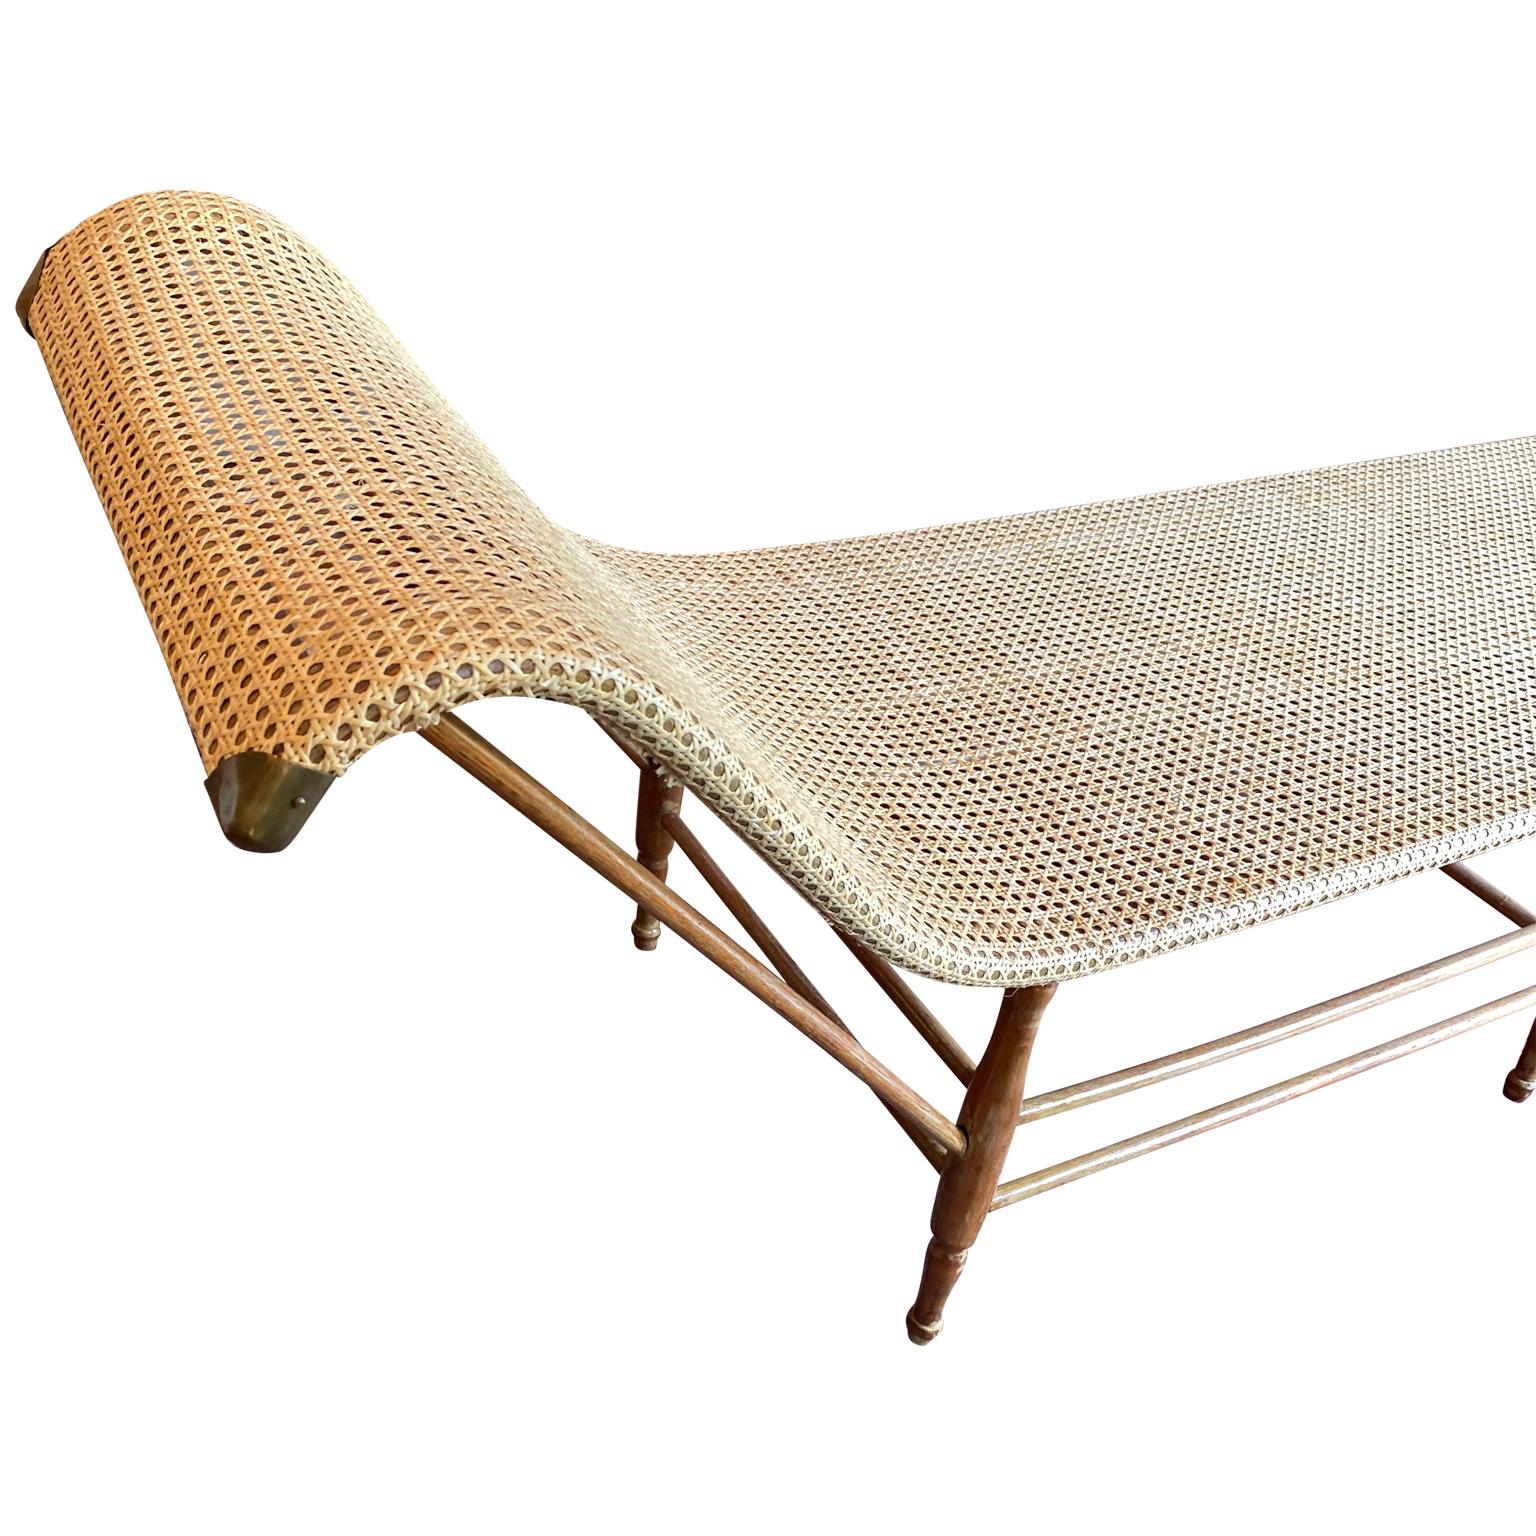 American Mid-Century Modern Caned Chaise Lounge with Brass Hardware